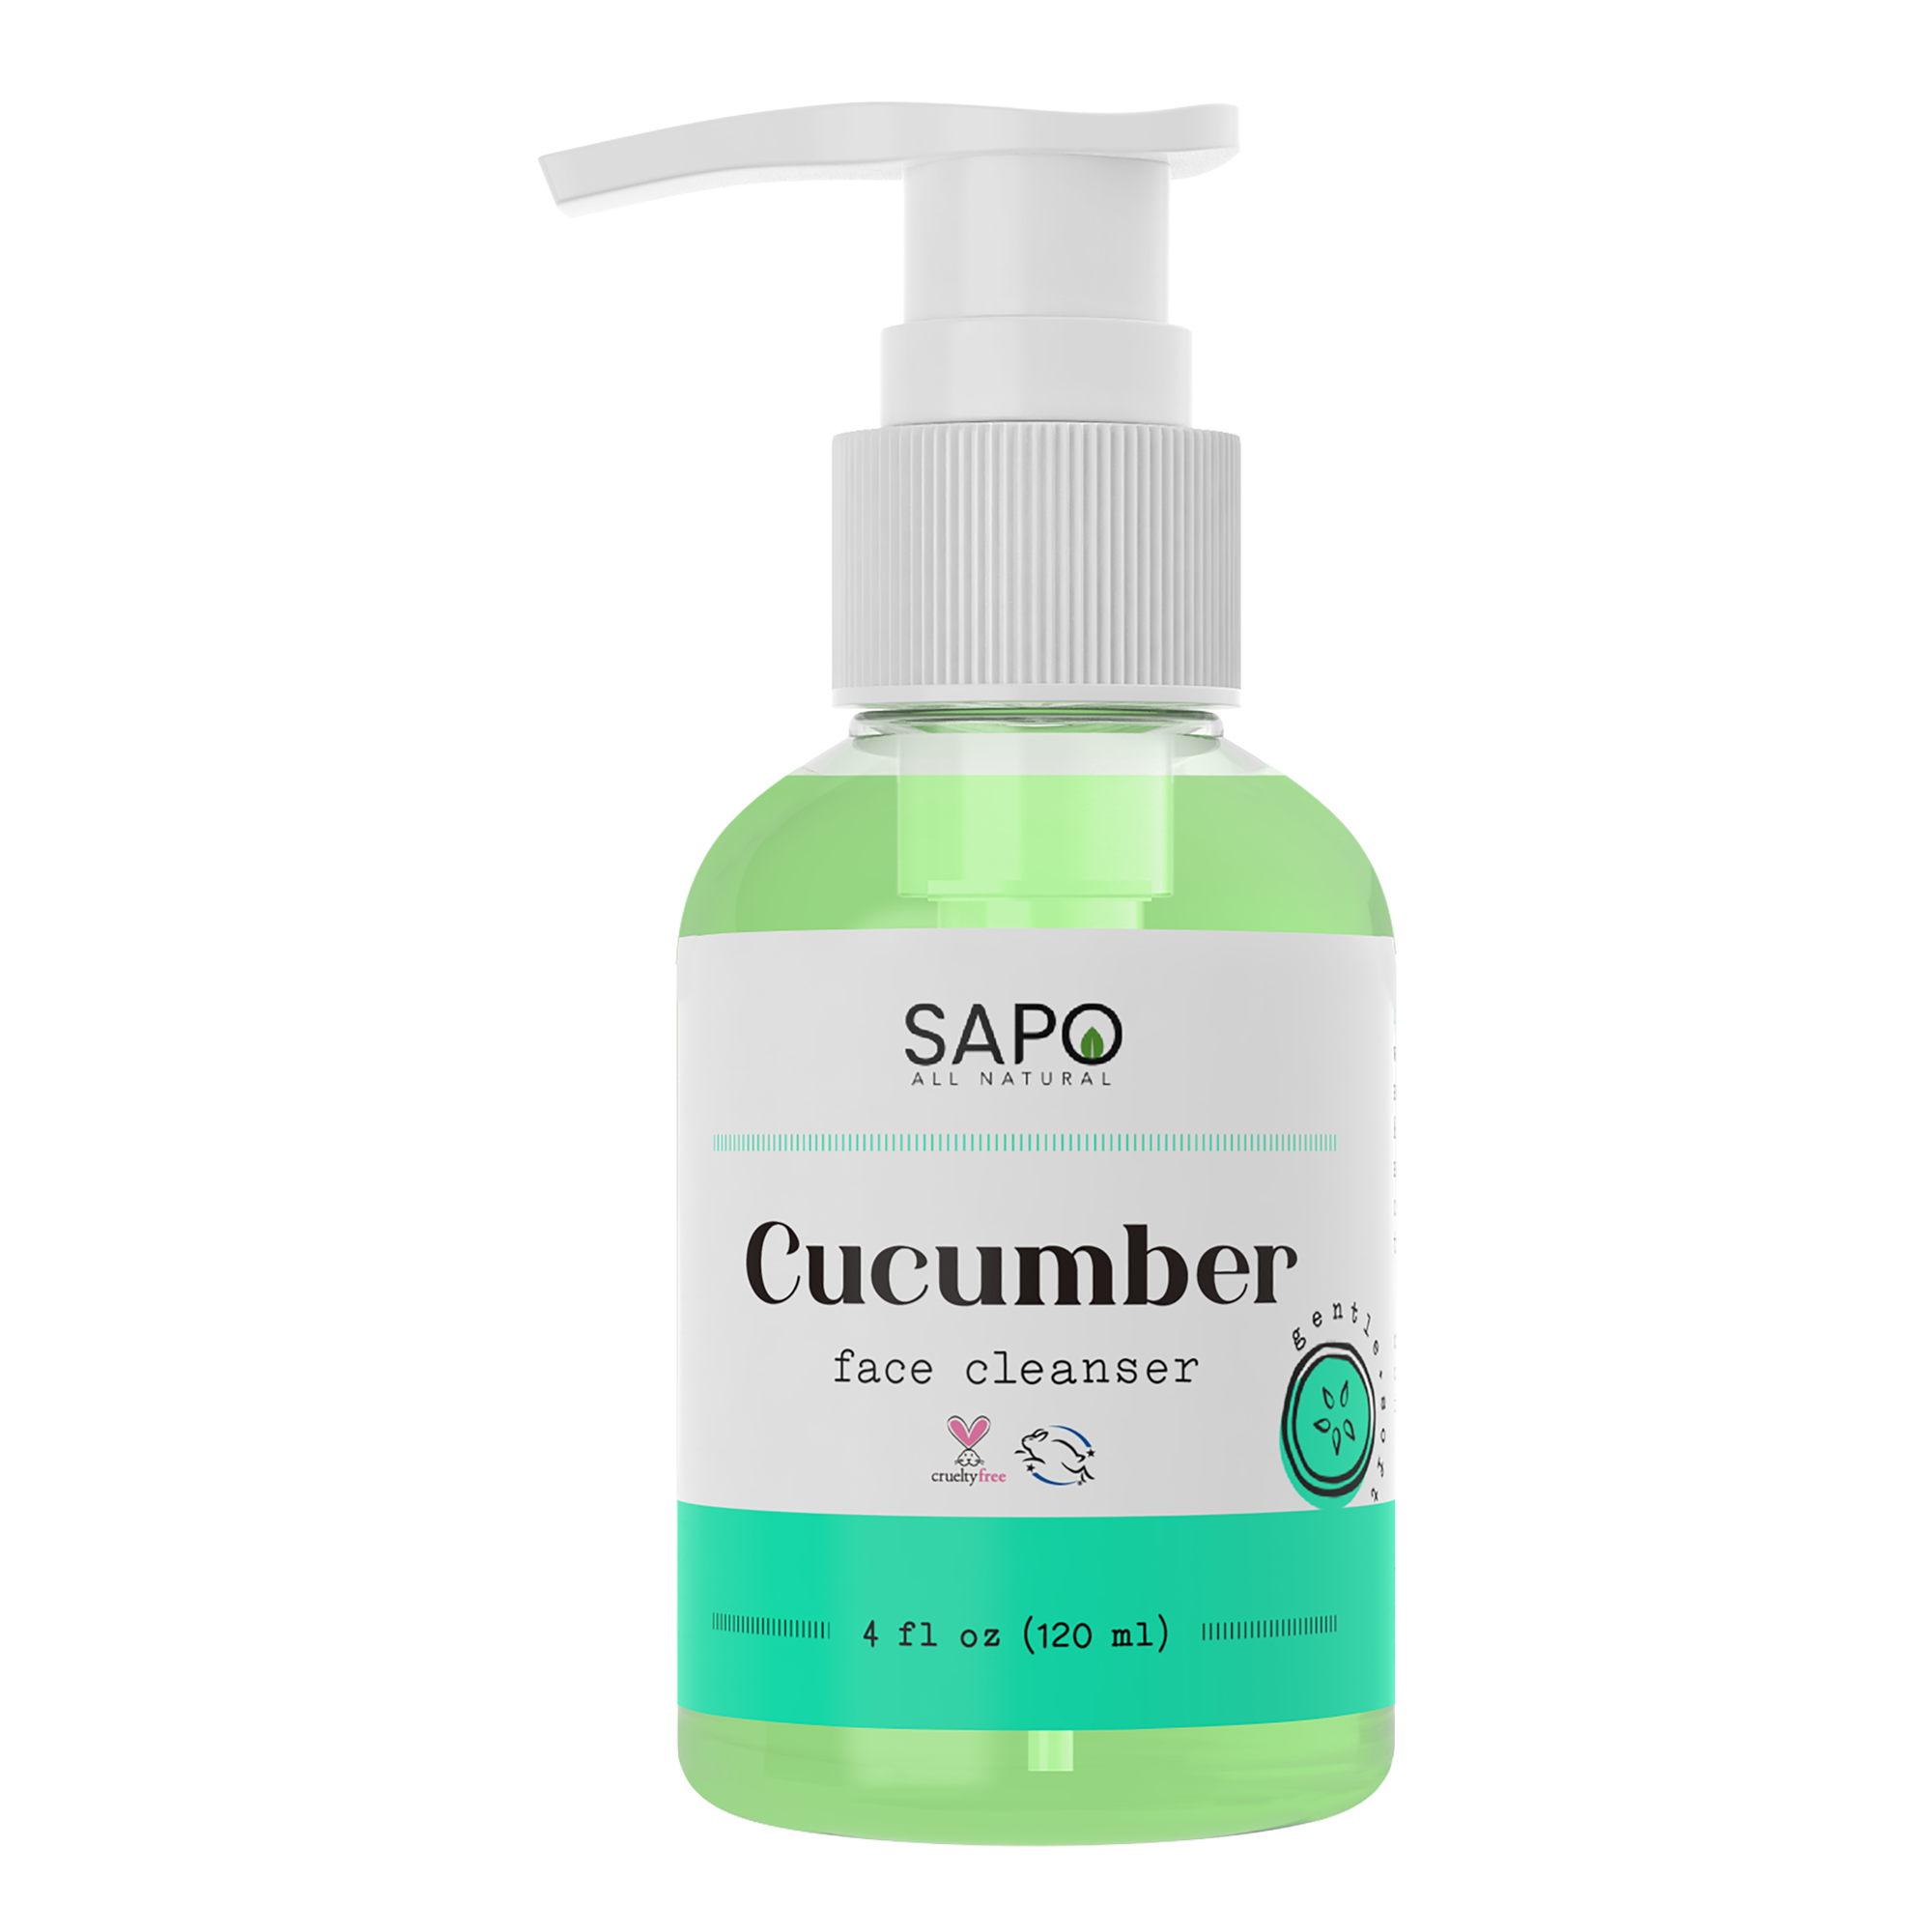 Sapo All Natural Cucumber Face Cleanser